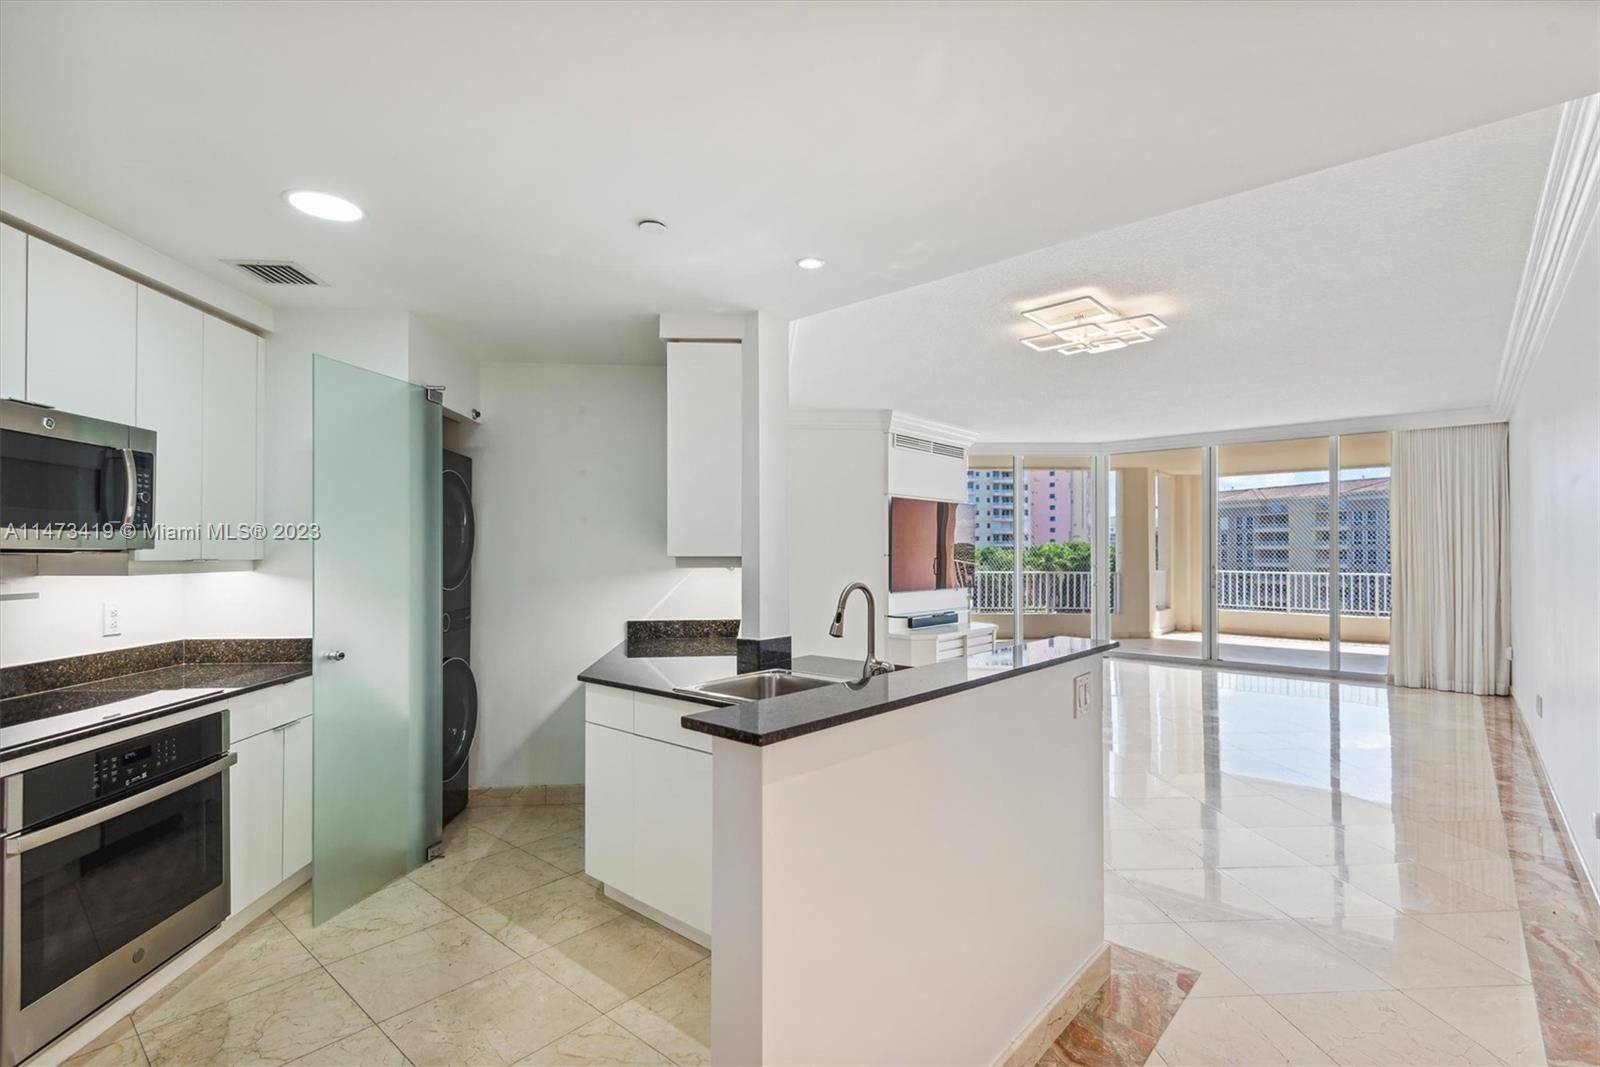 Discover luxury living at its finest in this quant two bedroom, two bathroom Penthouse residence at Resort Villa II in The Ocean Club, Key Biscayne.